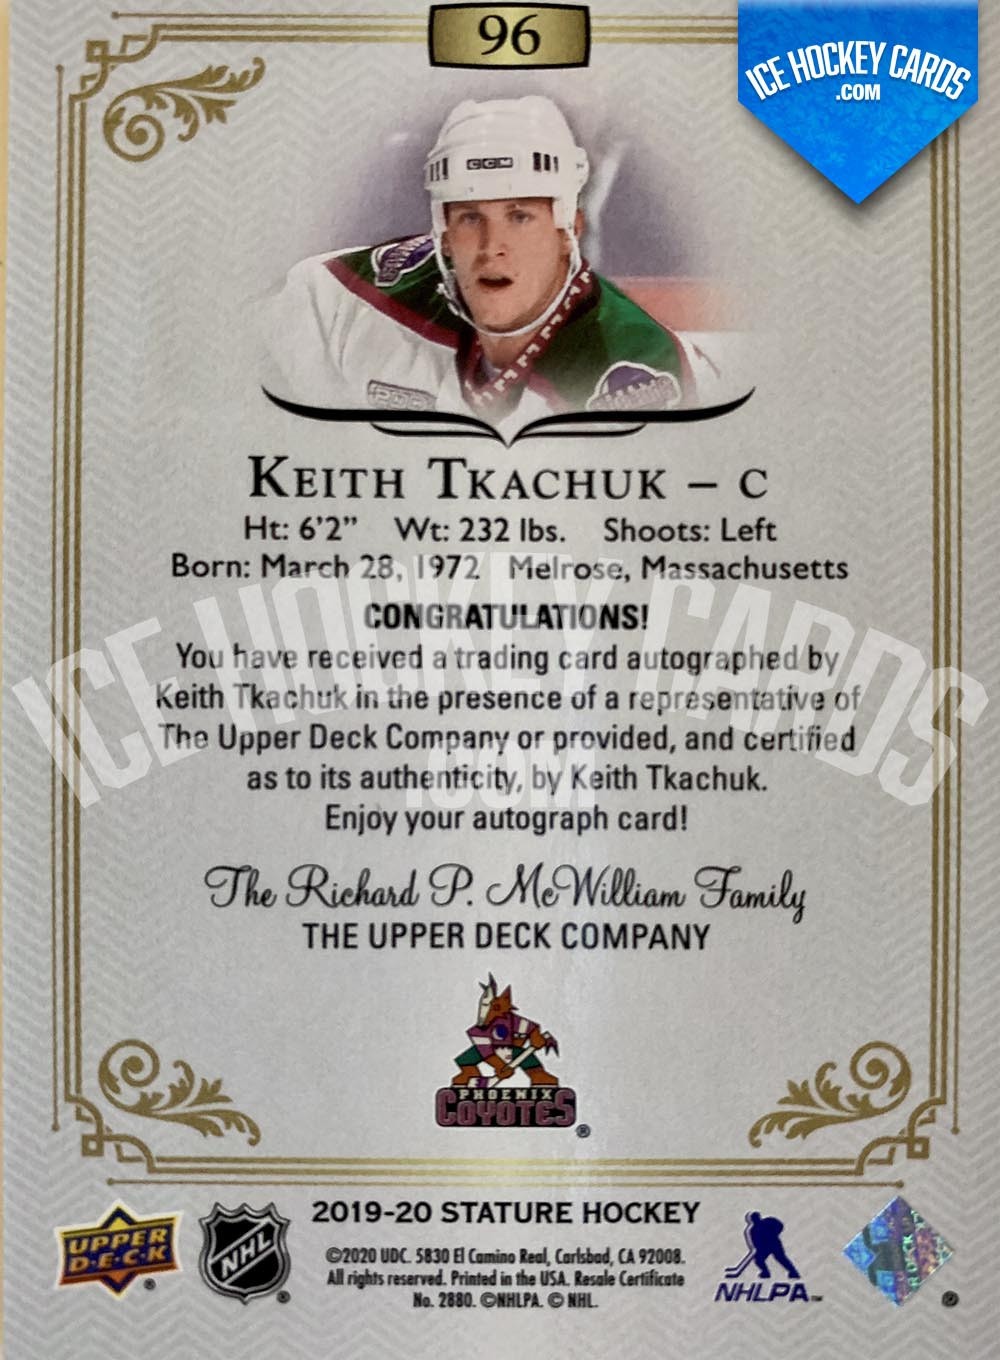 Upper Deck - Stature 2019-20 - Keith Tkachuk Autograph Card Green # to 65 back